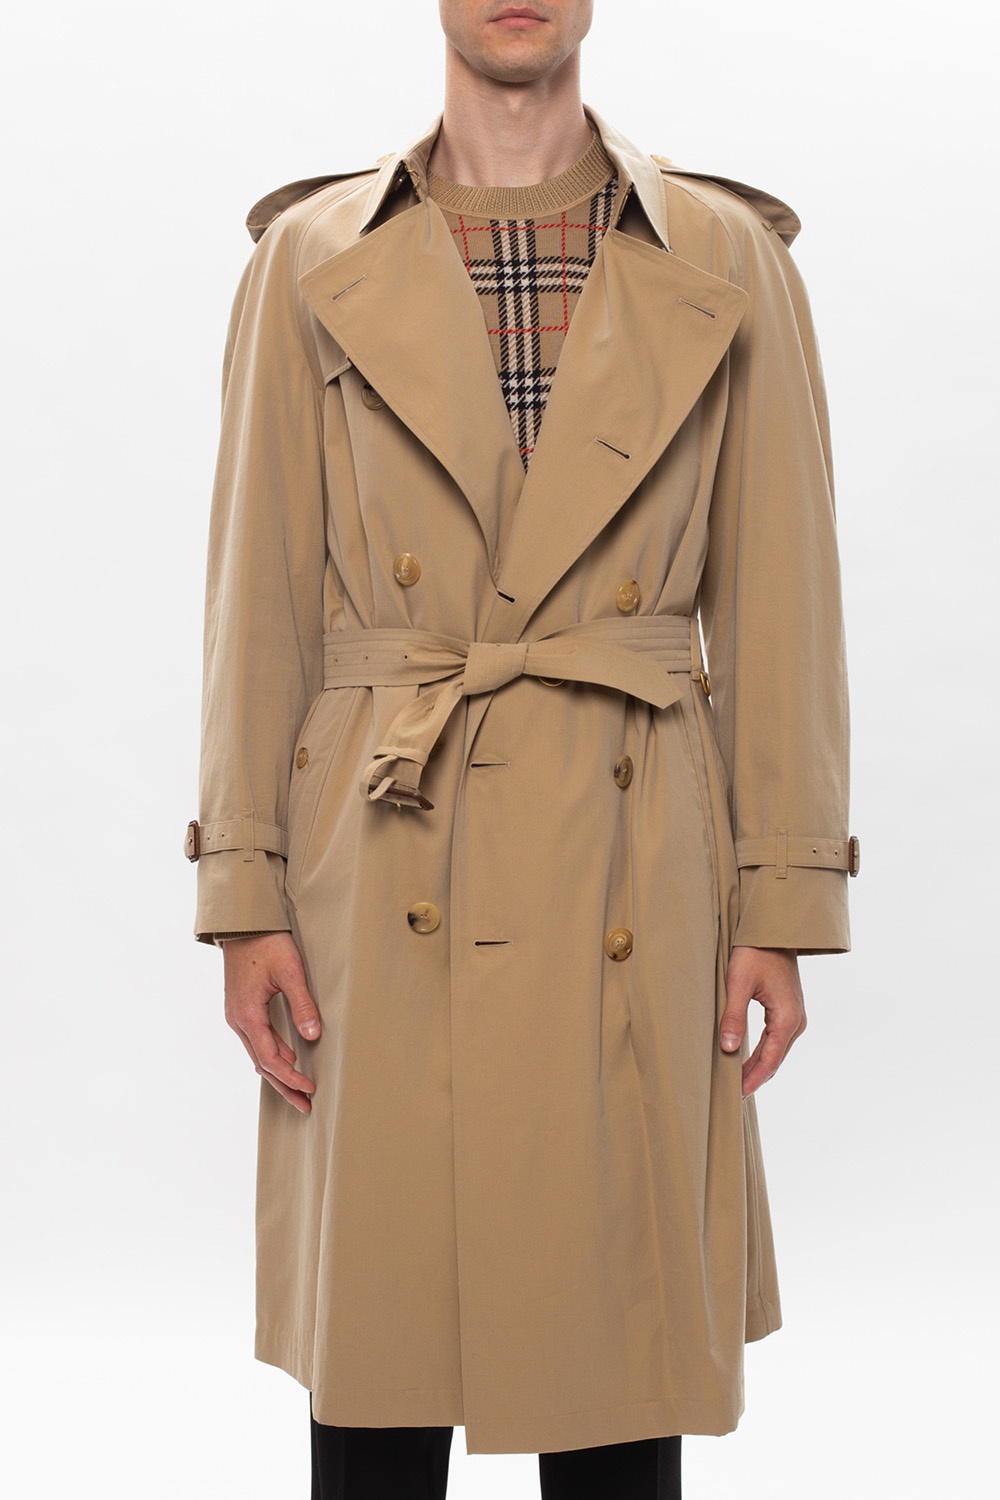 Burberry ‘Westminster’ trench coat